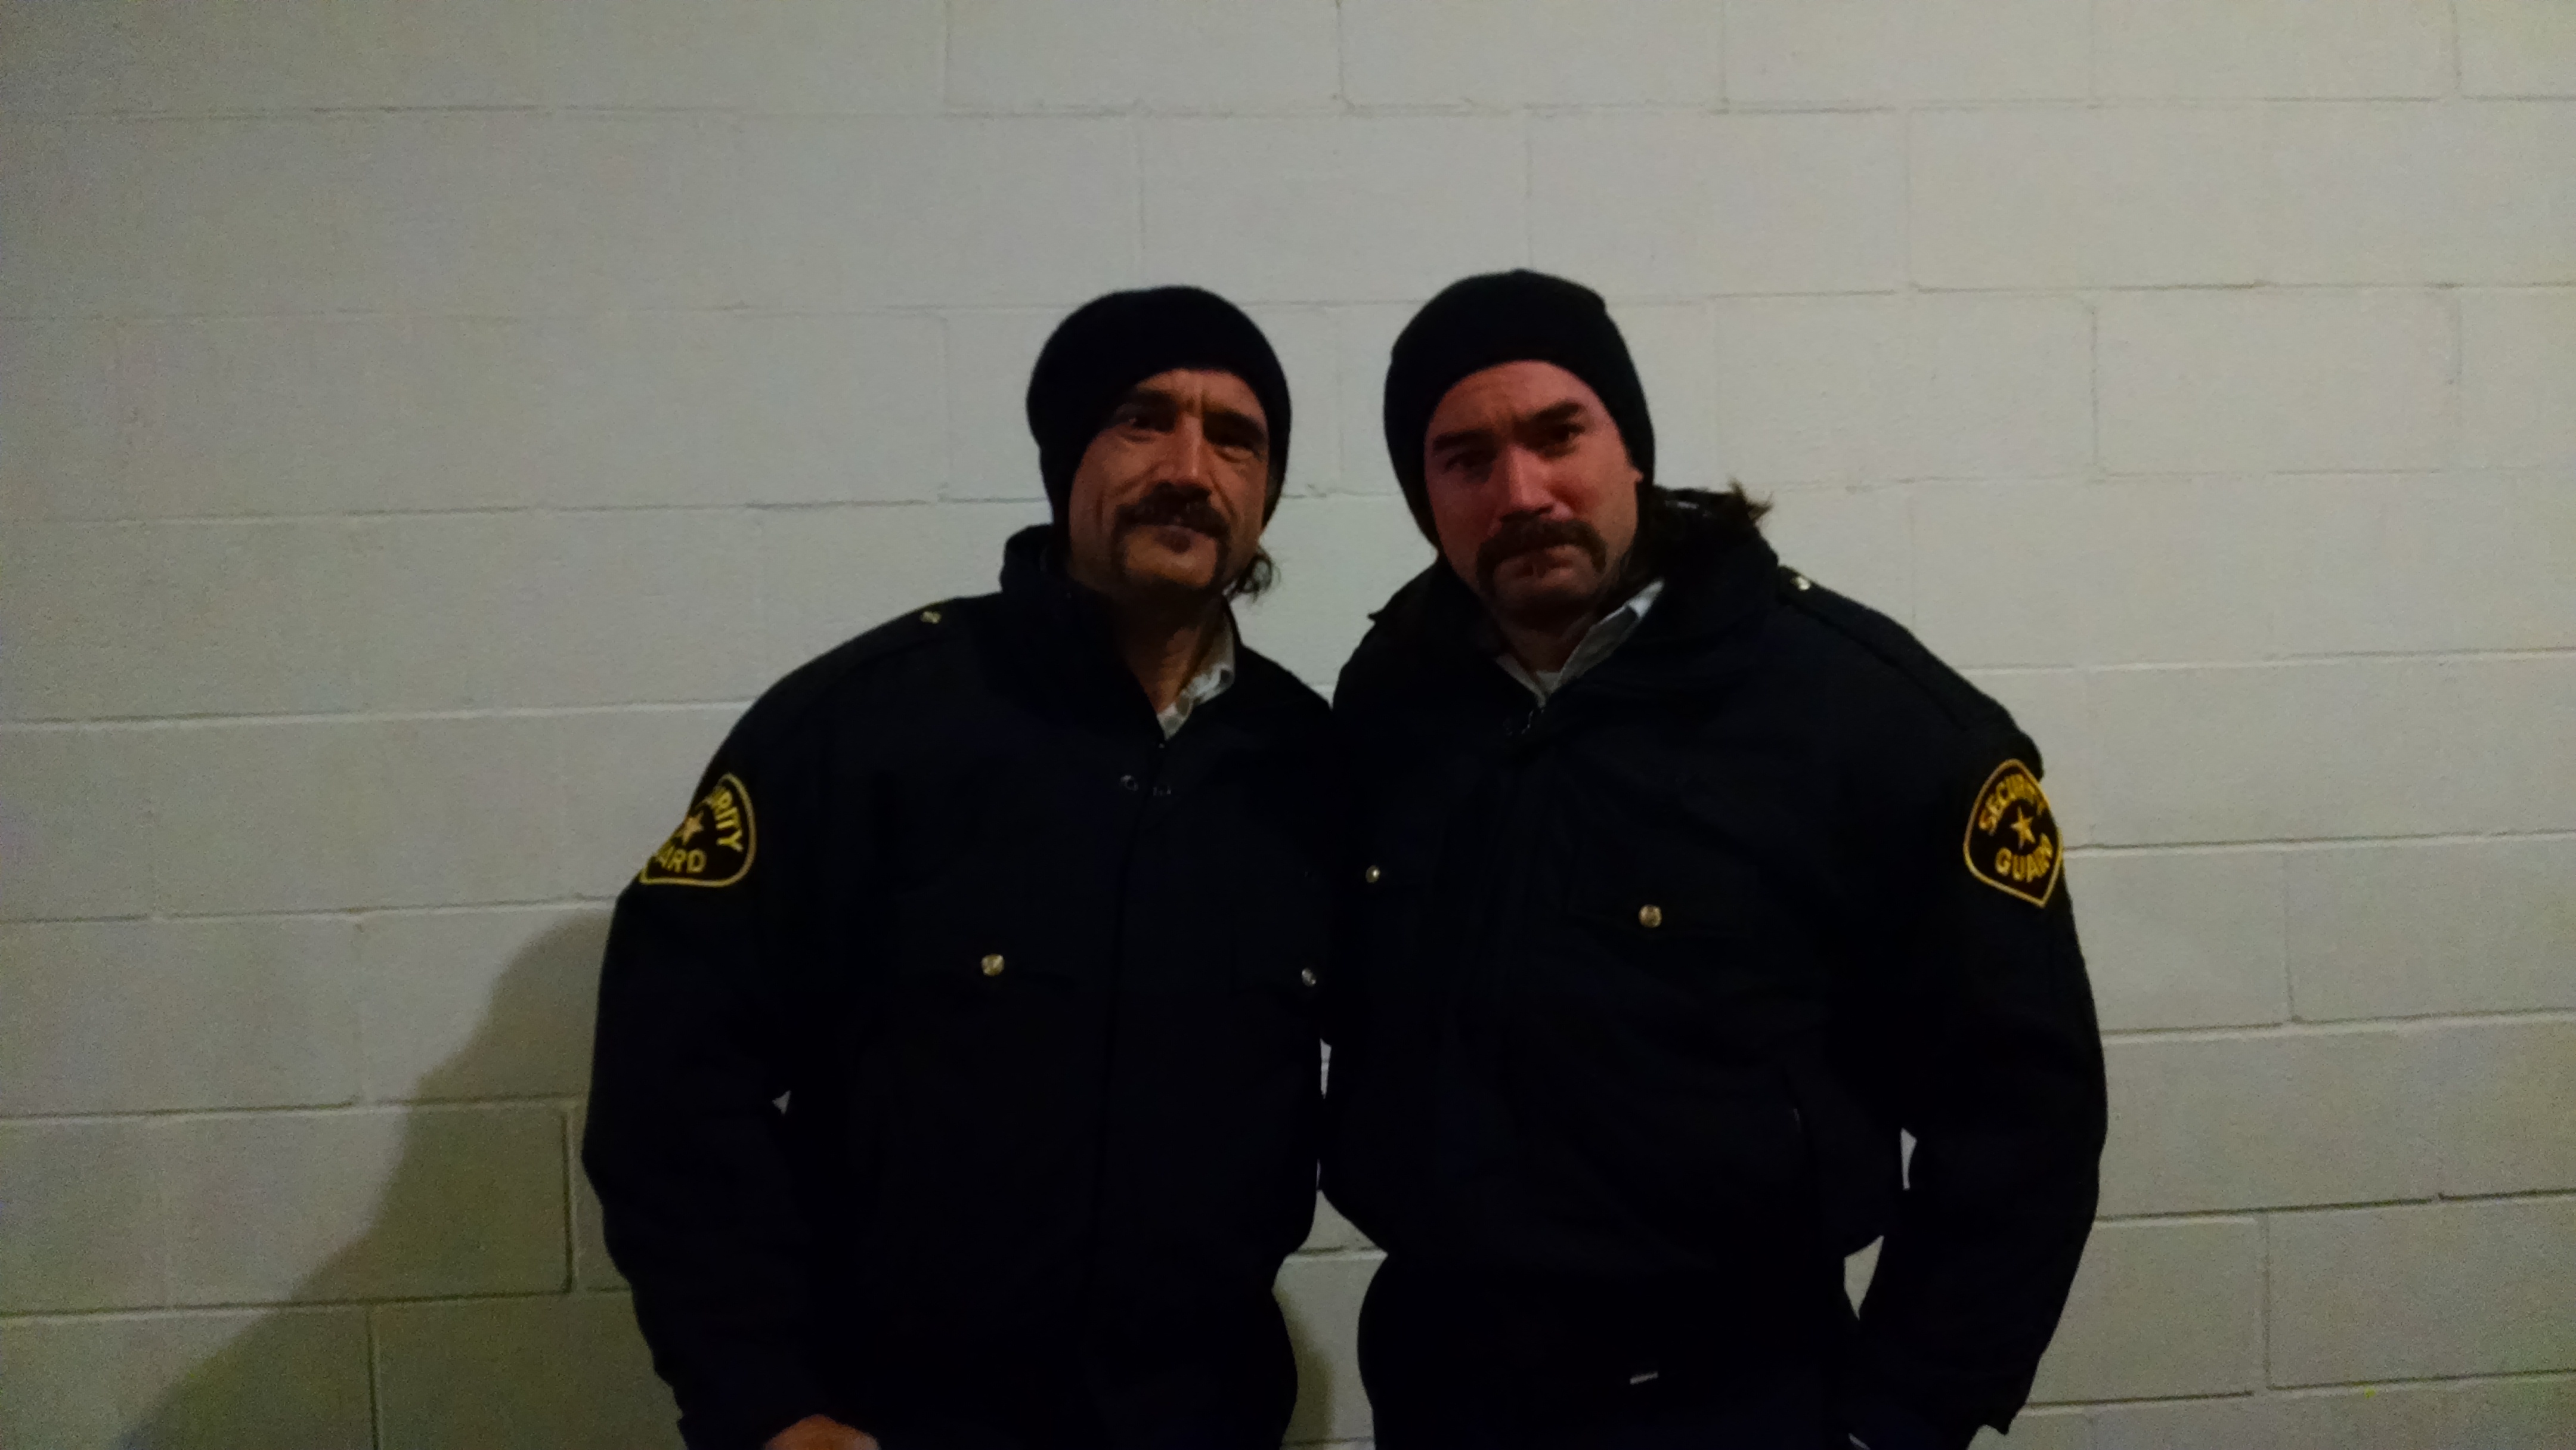 Ryan Carr and actor Elias Koteas on the set of Chicago P.D.